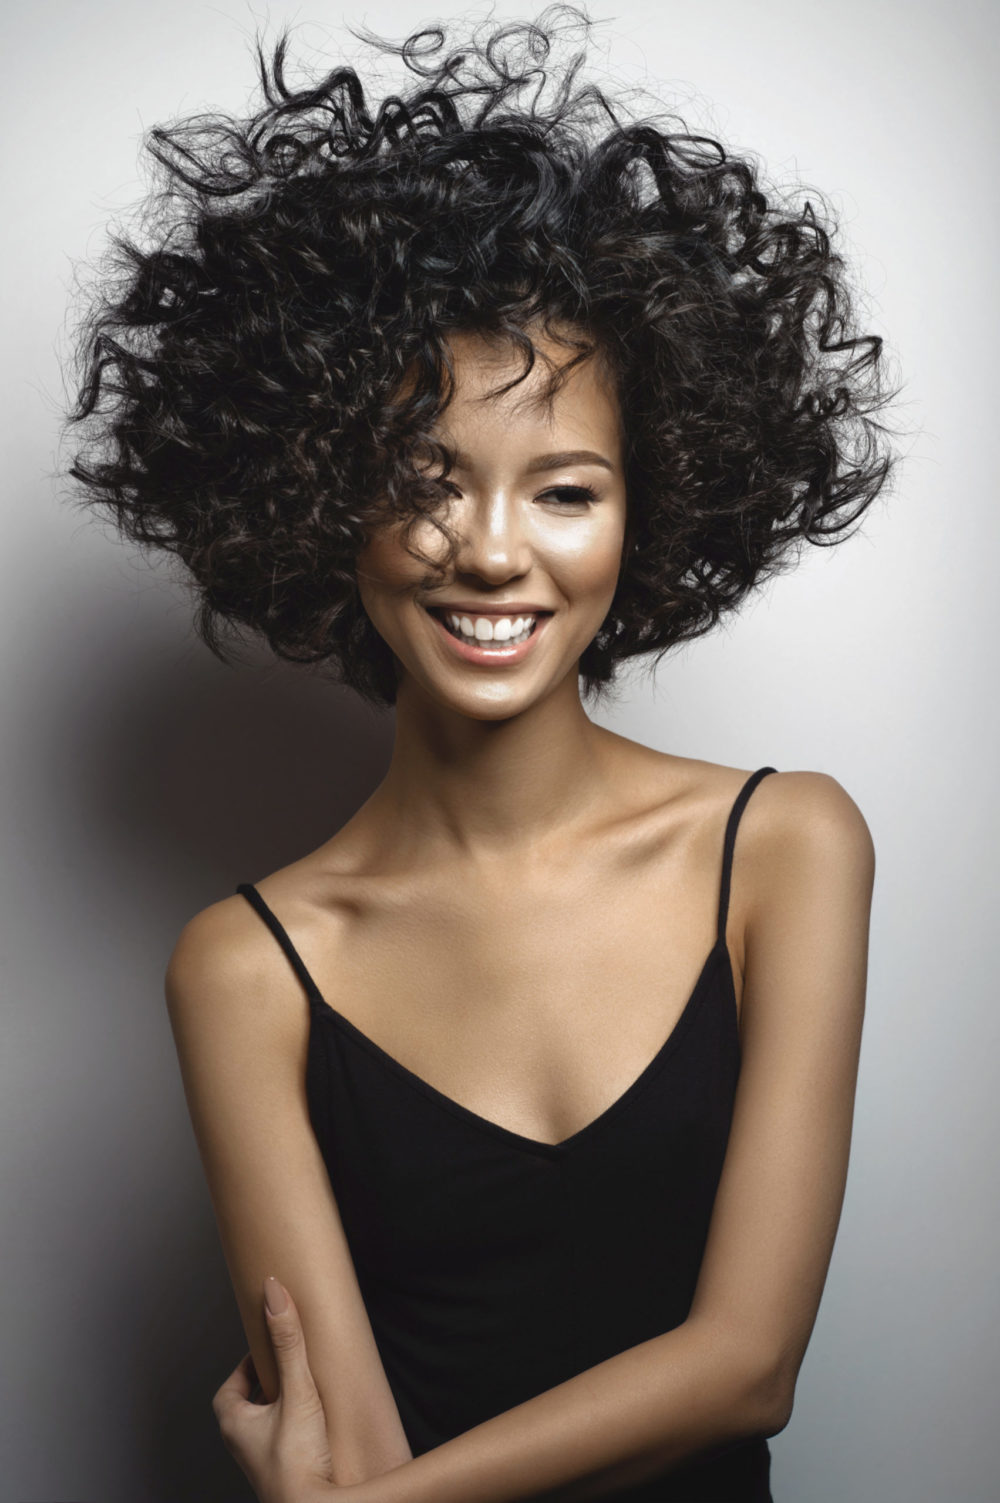 Shiny Soft Black, one of the best hair colors for curly hair